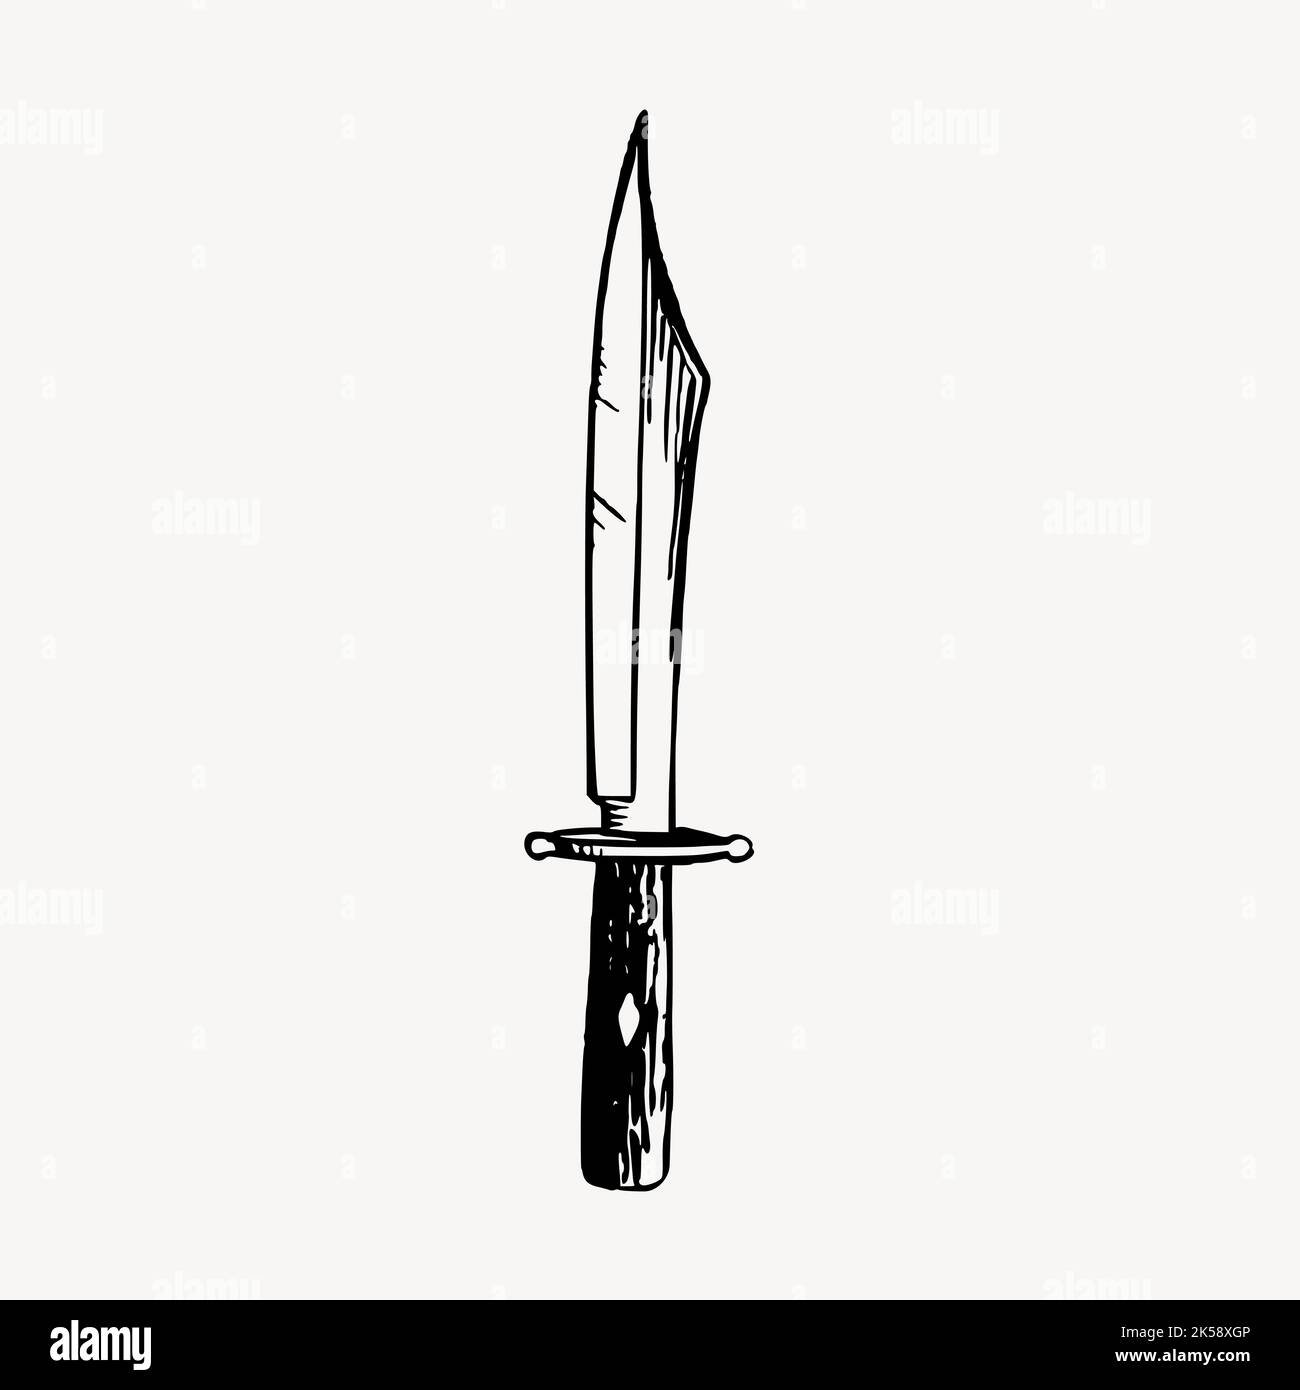 Knife clipart, vintage weapon illustration vector Stock Vector